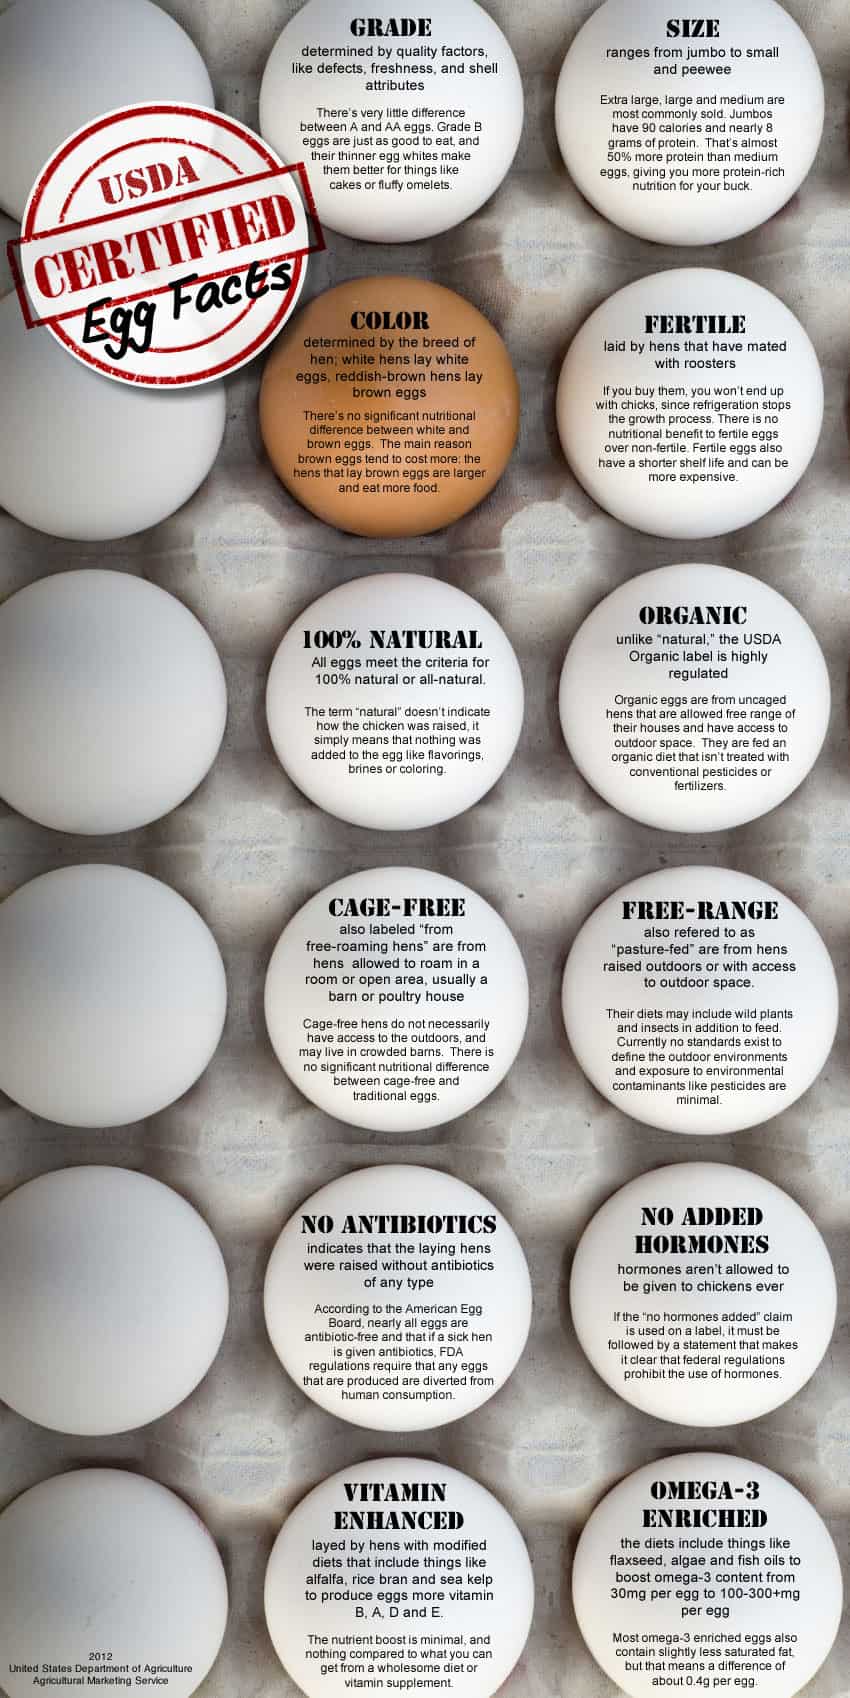 USDA facts about eggs. http://blogs.usda.gov/2012/04/06/eggstra-eggstra-learn-all-about-them/ | Mother Would Know